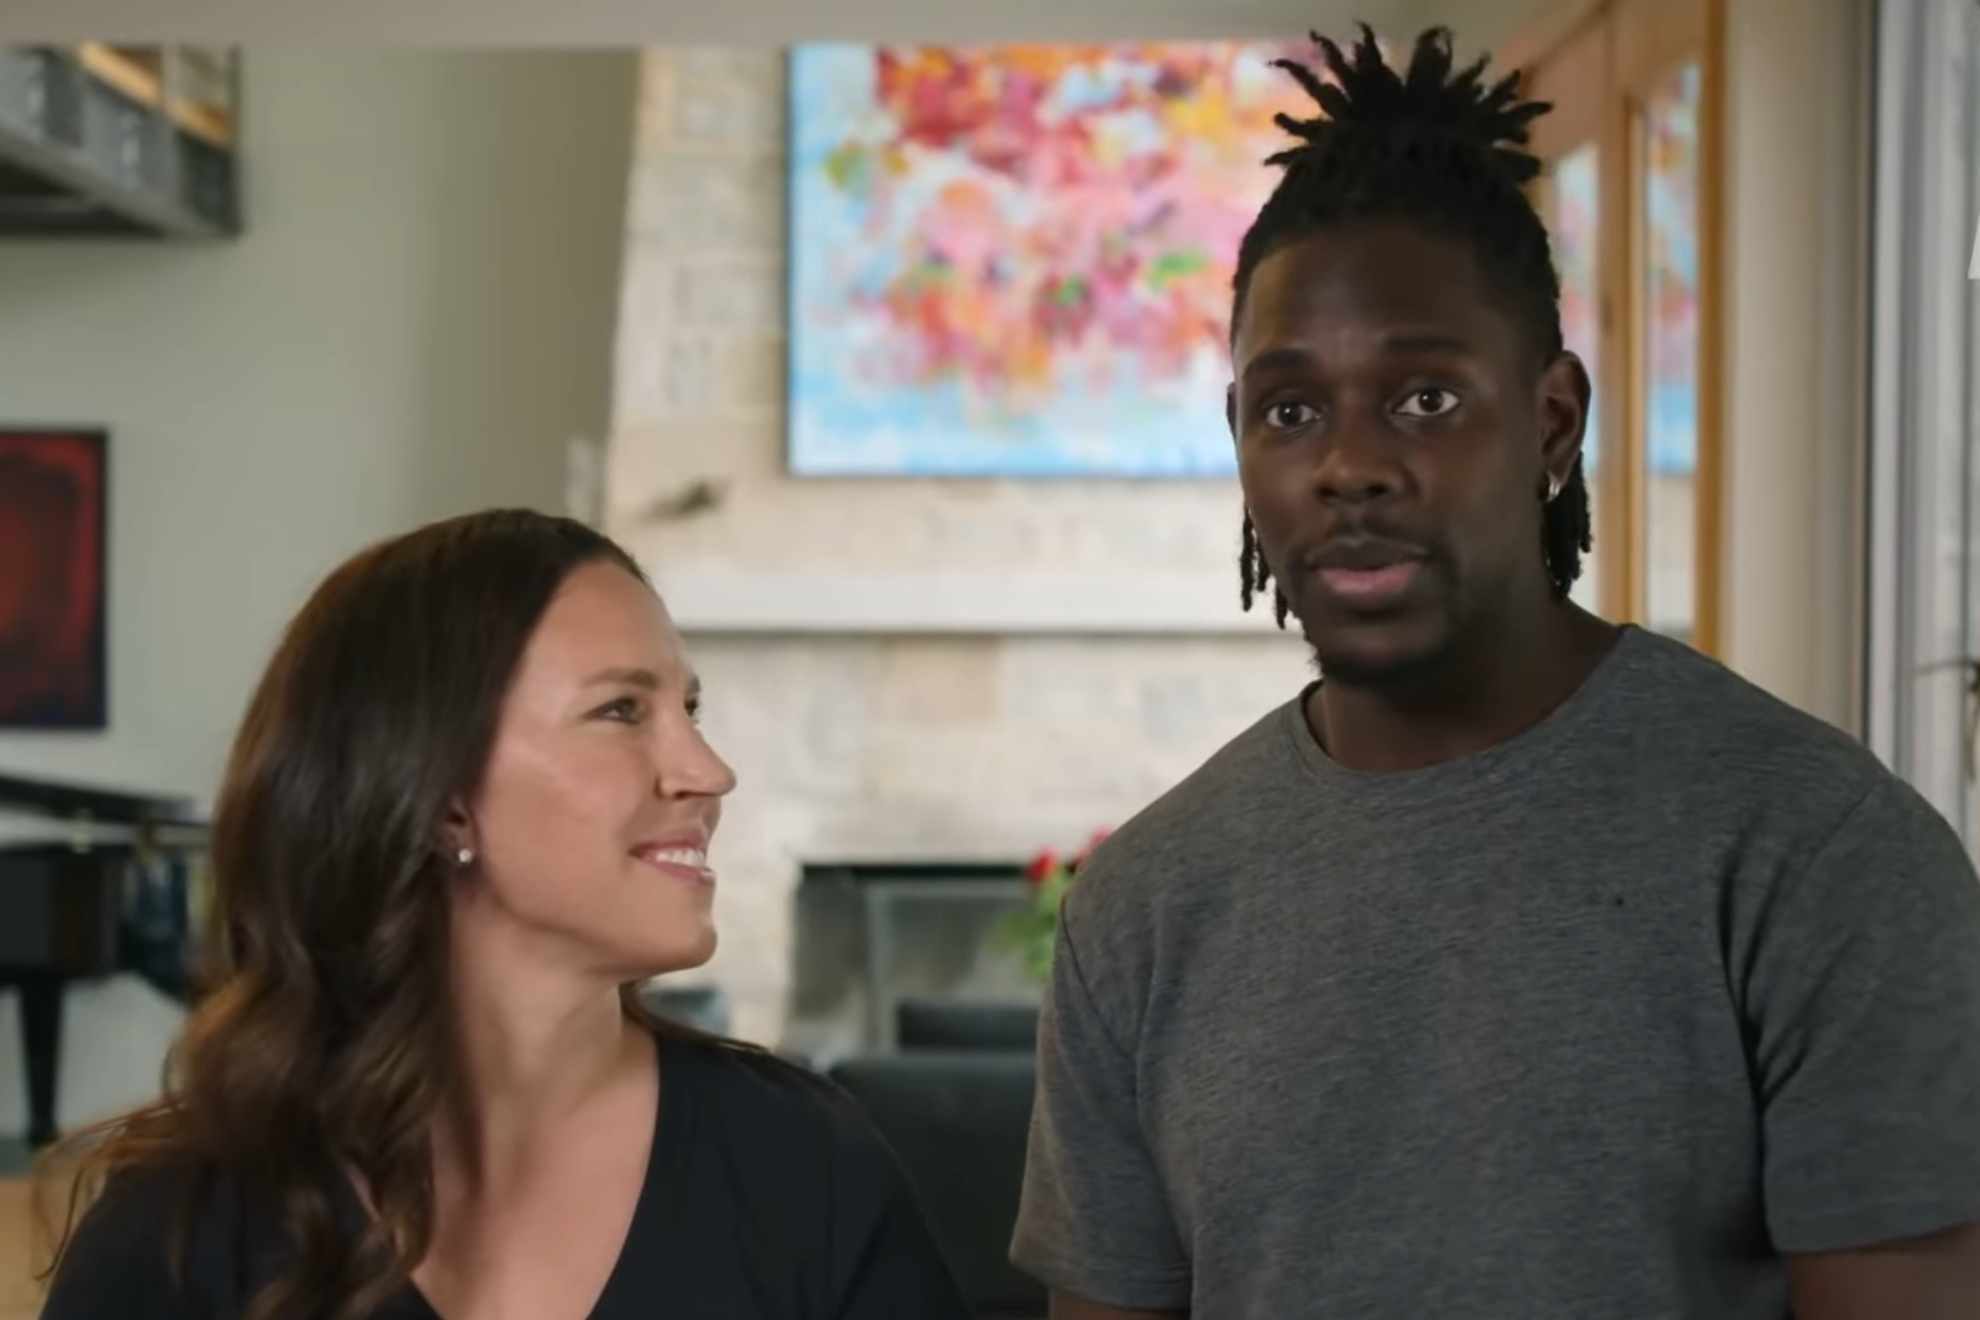 Former USWNT icon Lauren Holiday and NBAs Jrue Holiday have fallen victims to a scam worth millions of dollars.